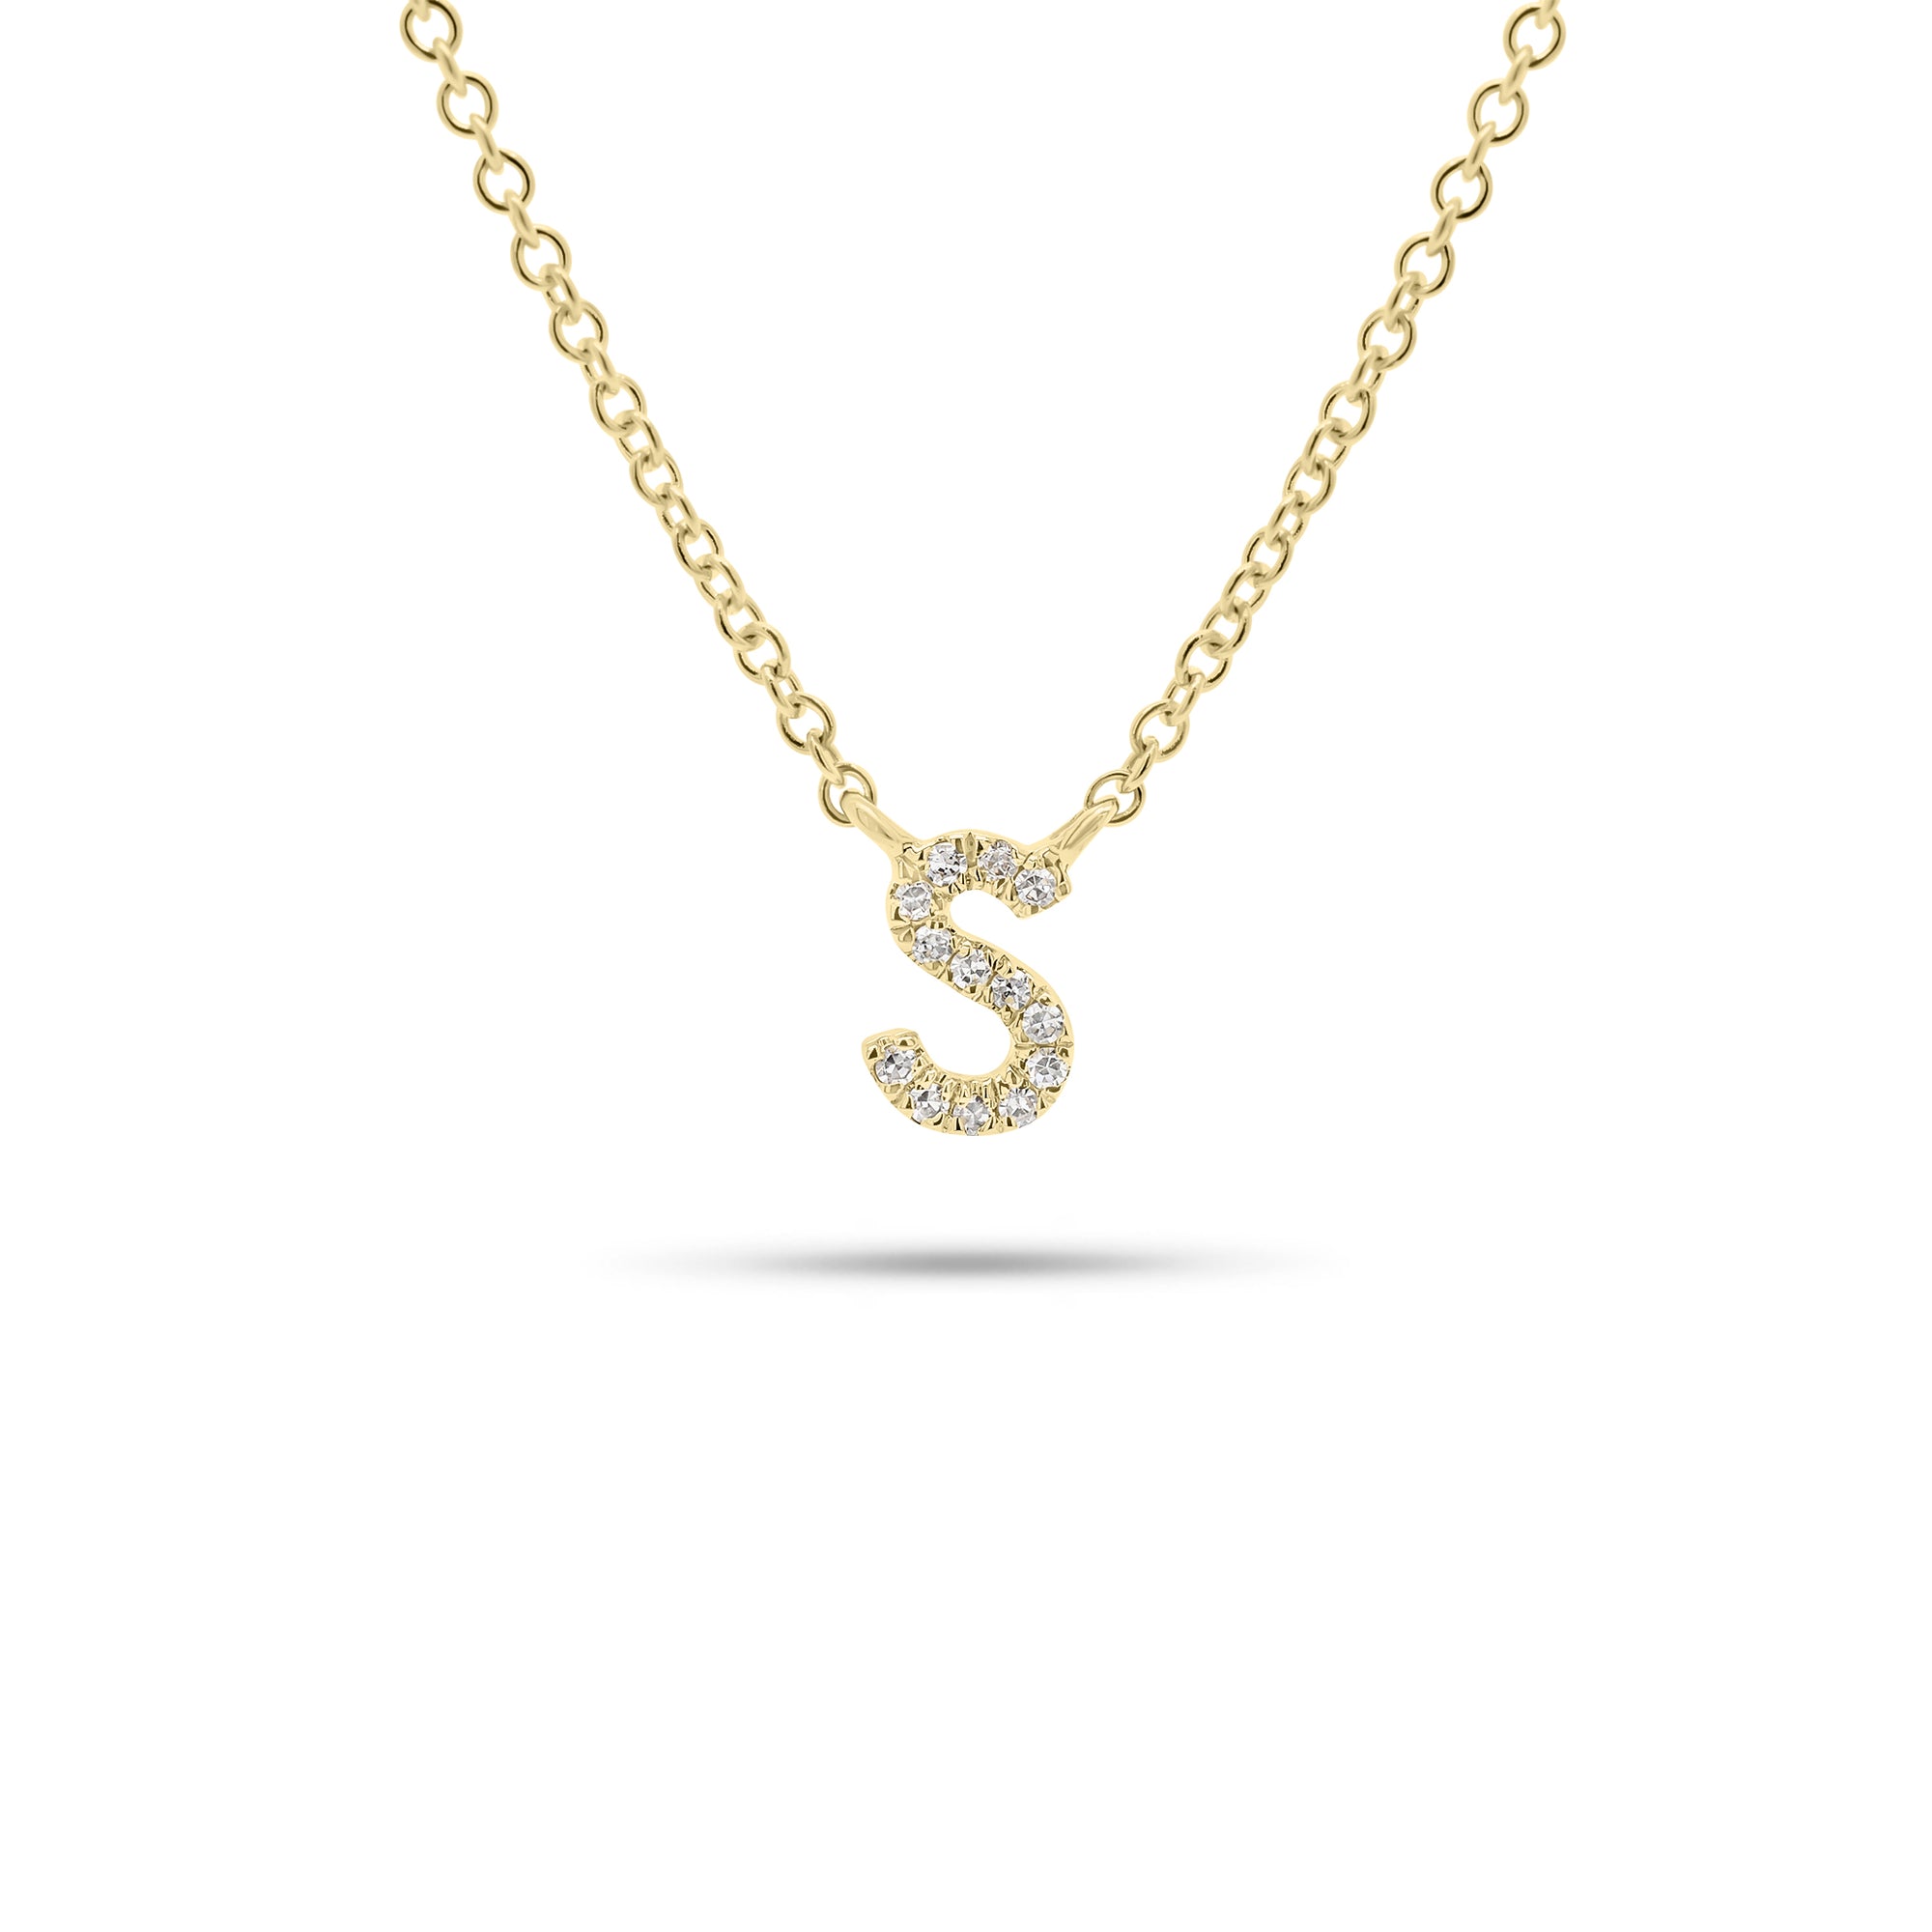 Diamond Initial Pendant Necklace - 14K gold weighing 1.76 grams  - 13 round diamonds weighing 0.03 carats